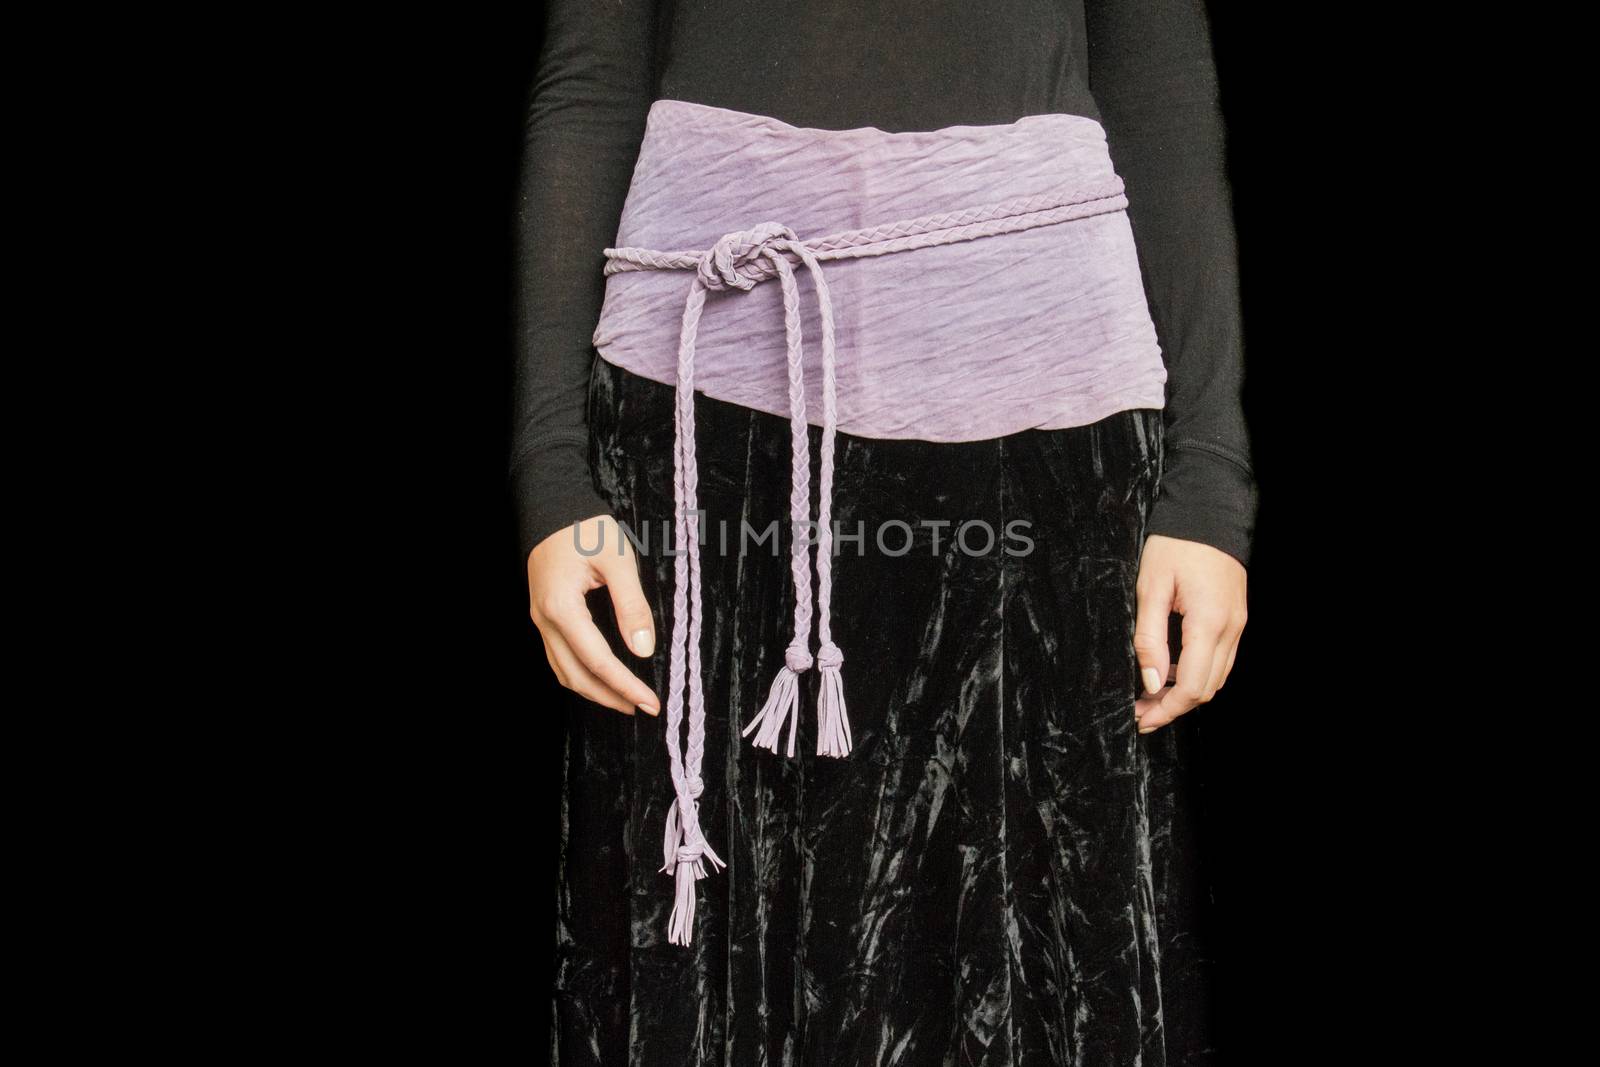 Black and Purple Dress cropped at the Waist height wit a waistband forming a Bow